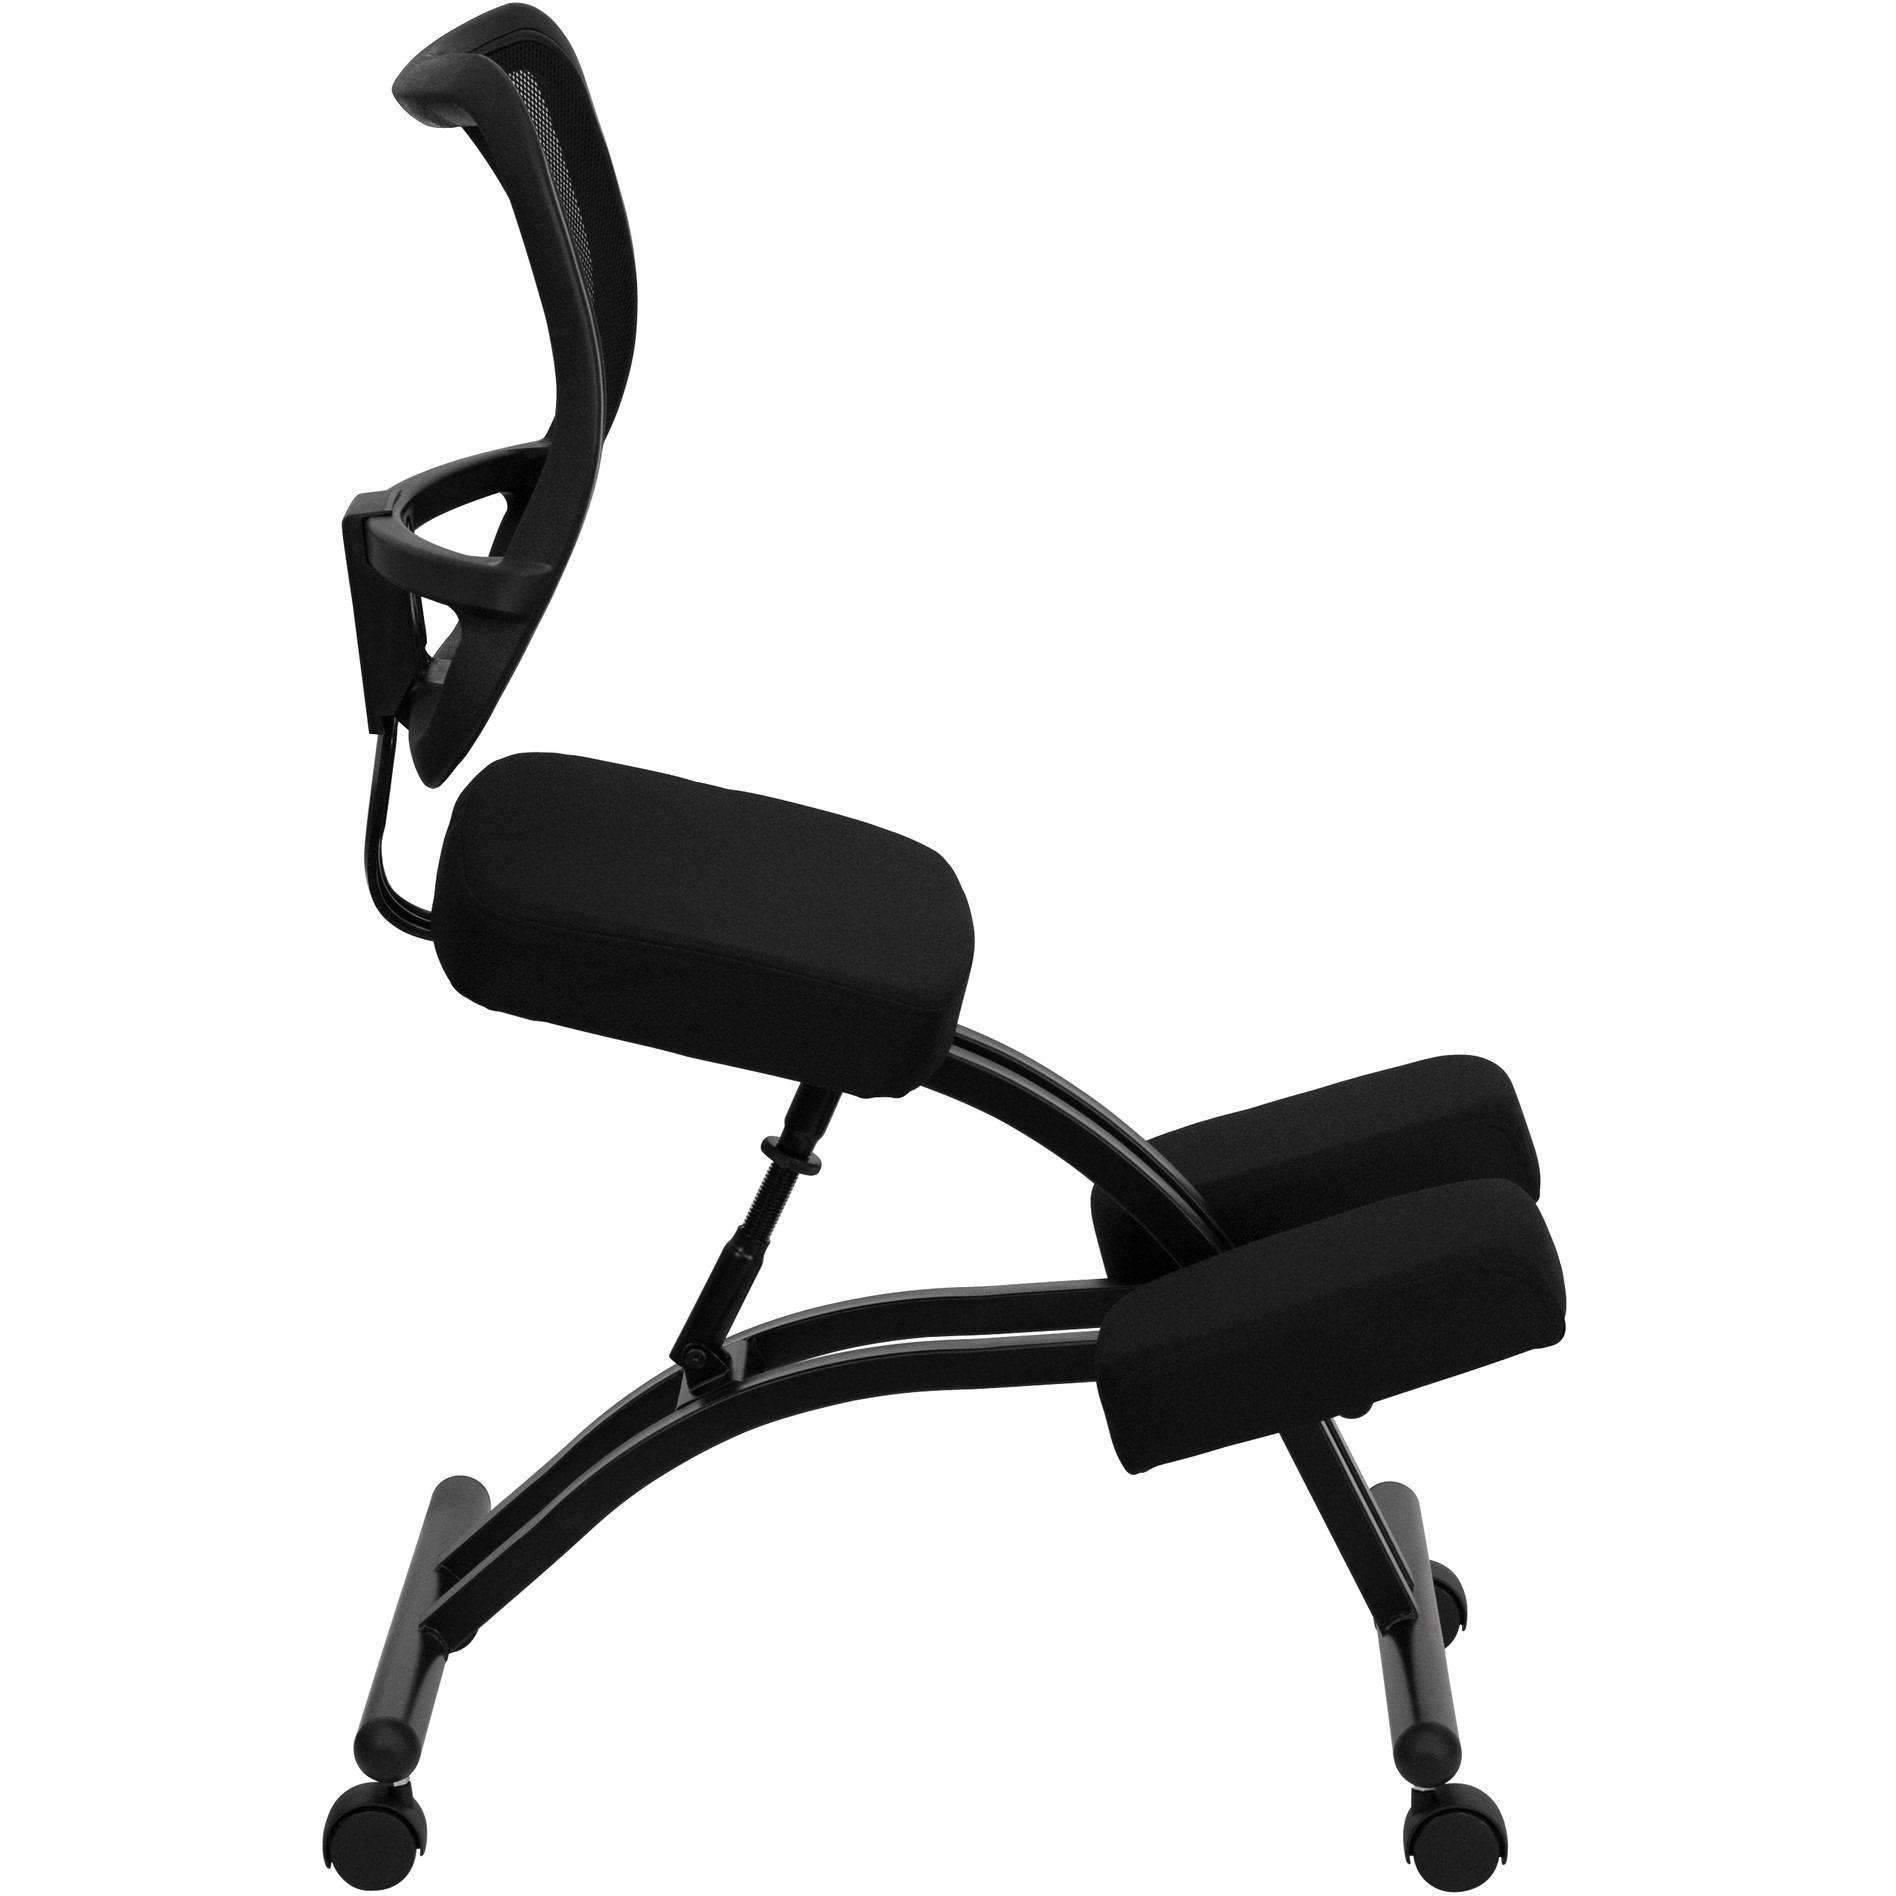 Sleekform Ergonomic Chair Review: Trying For 30 Days